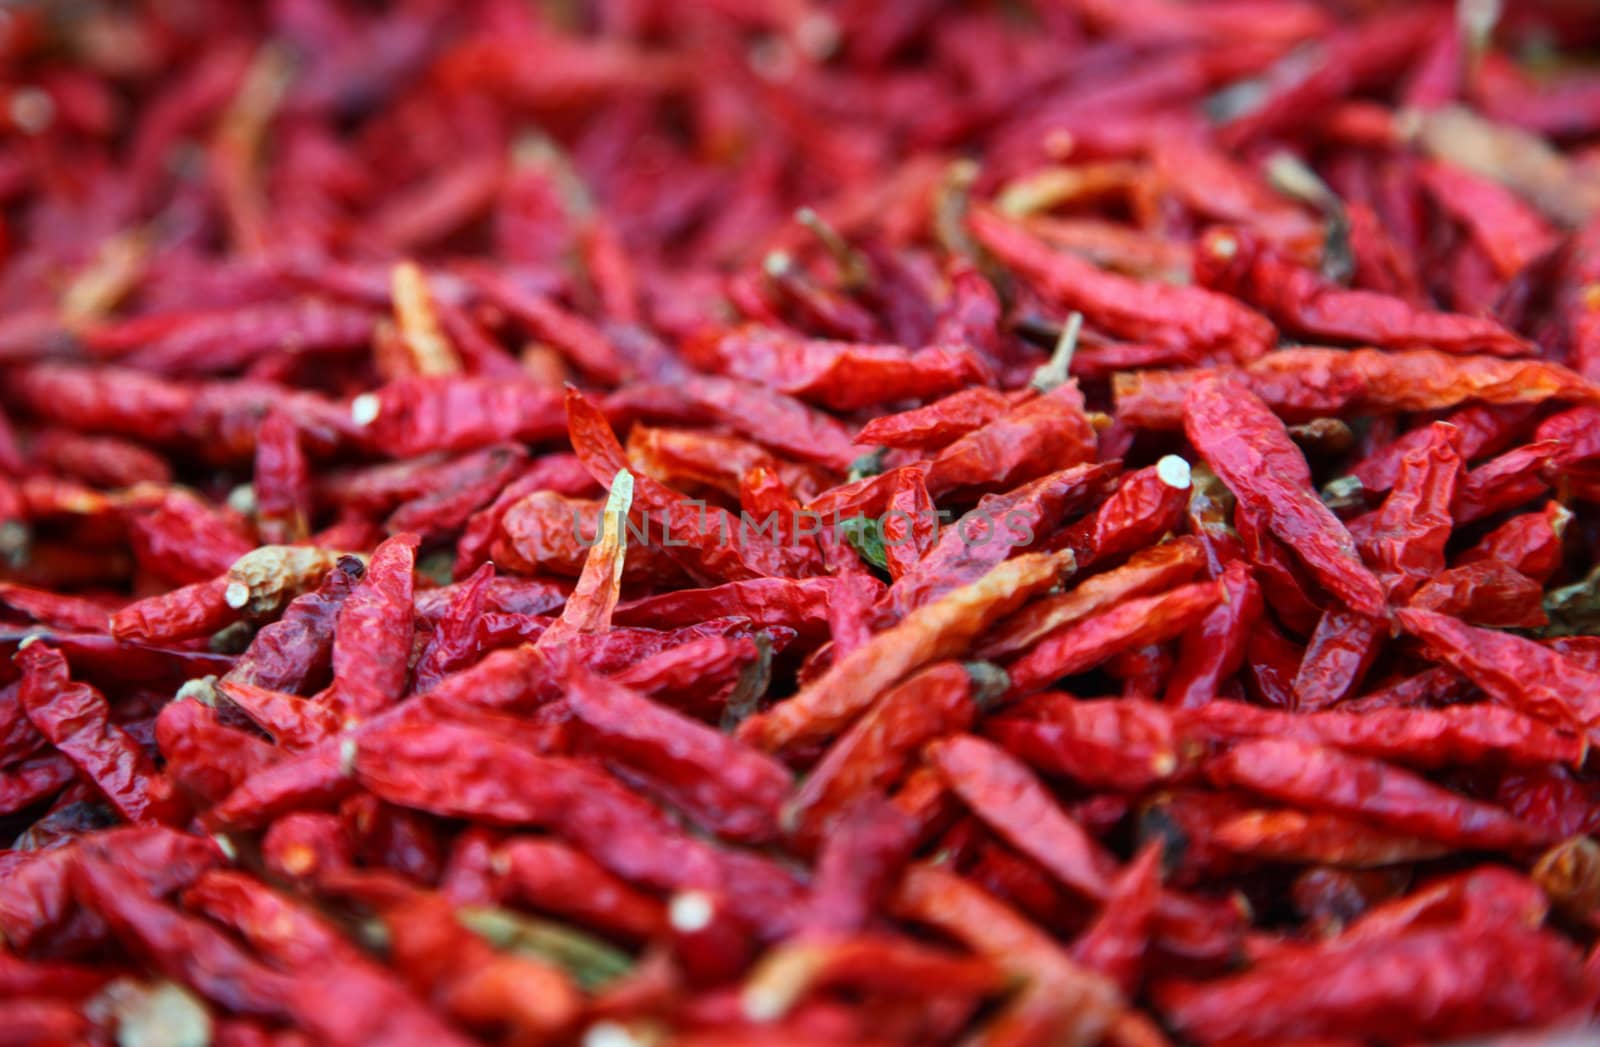 Red And Dried Chili Peppers by nfx702